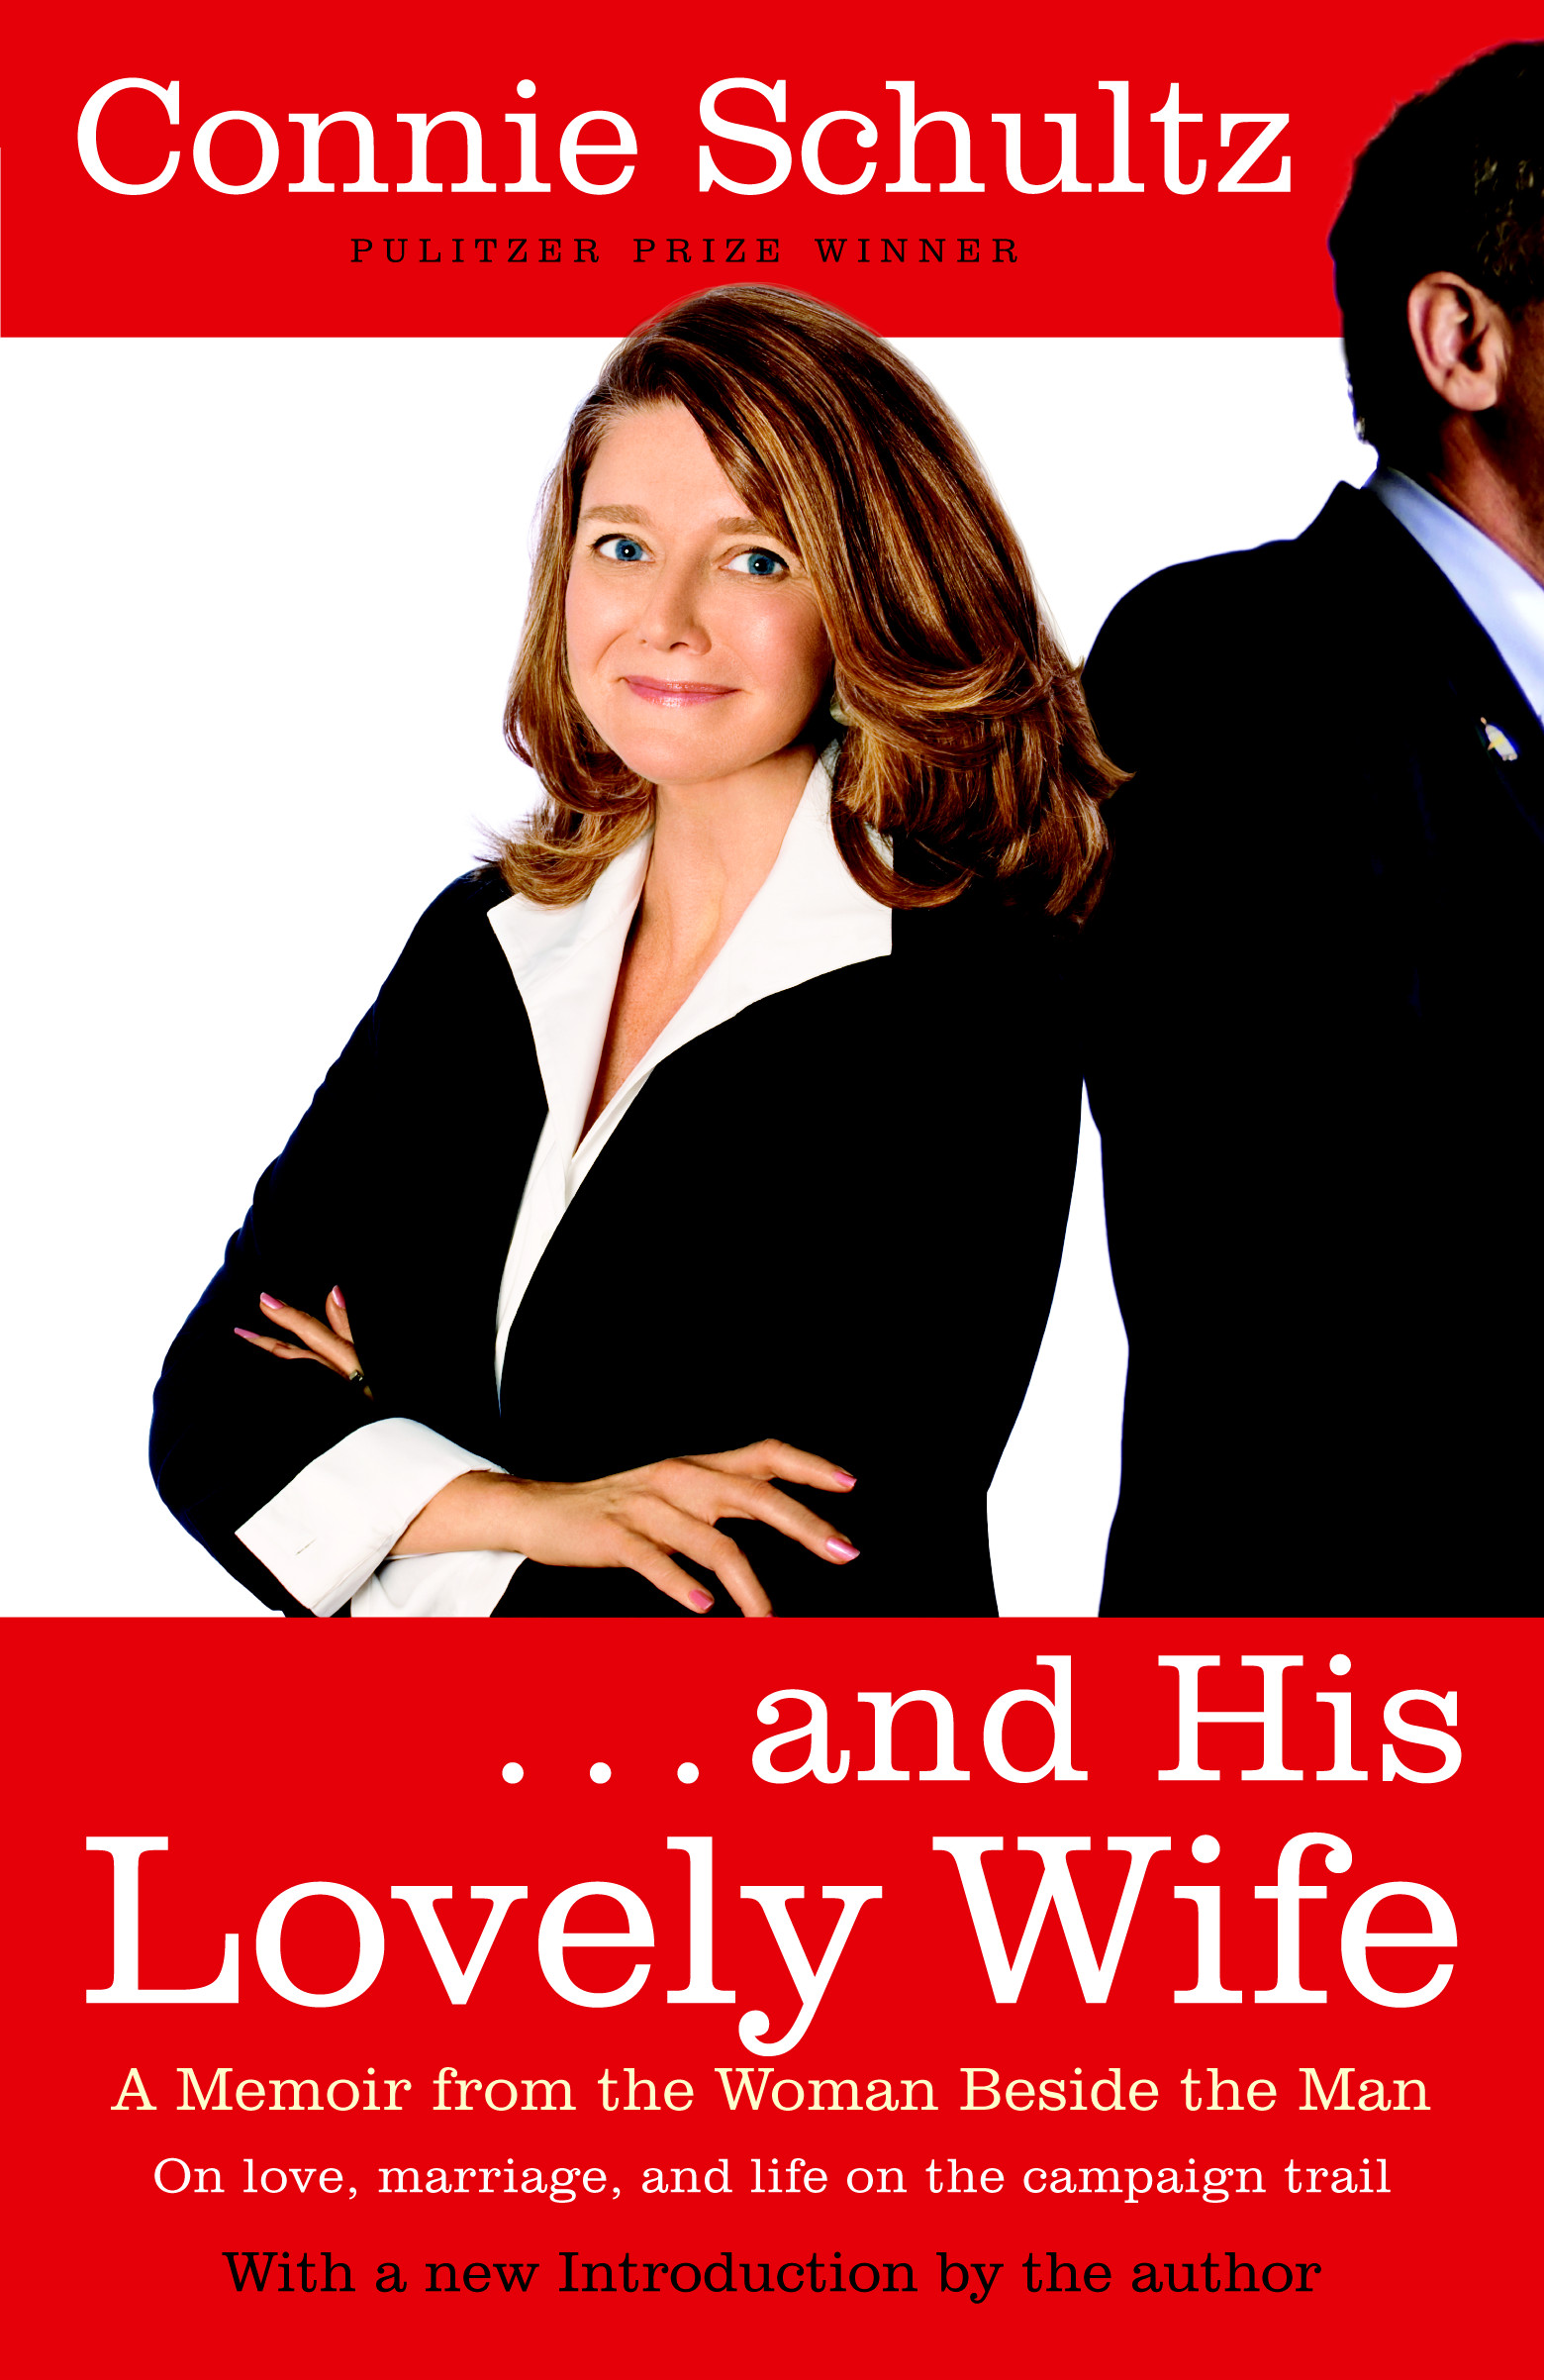 Connie Schultz: . . . and His Lovely Wife (Hardcover, 2007, Random House)